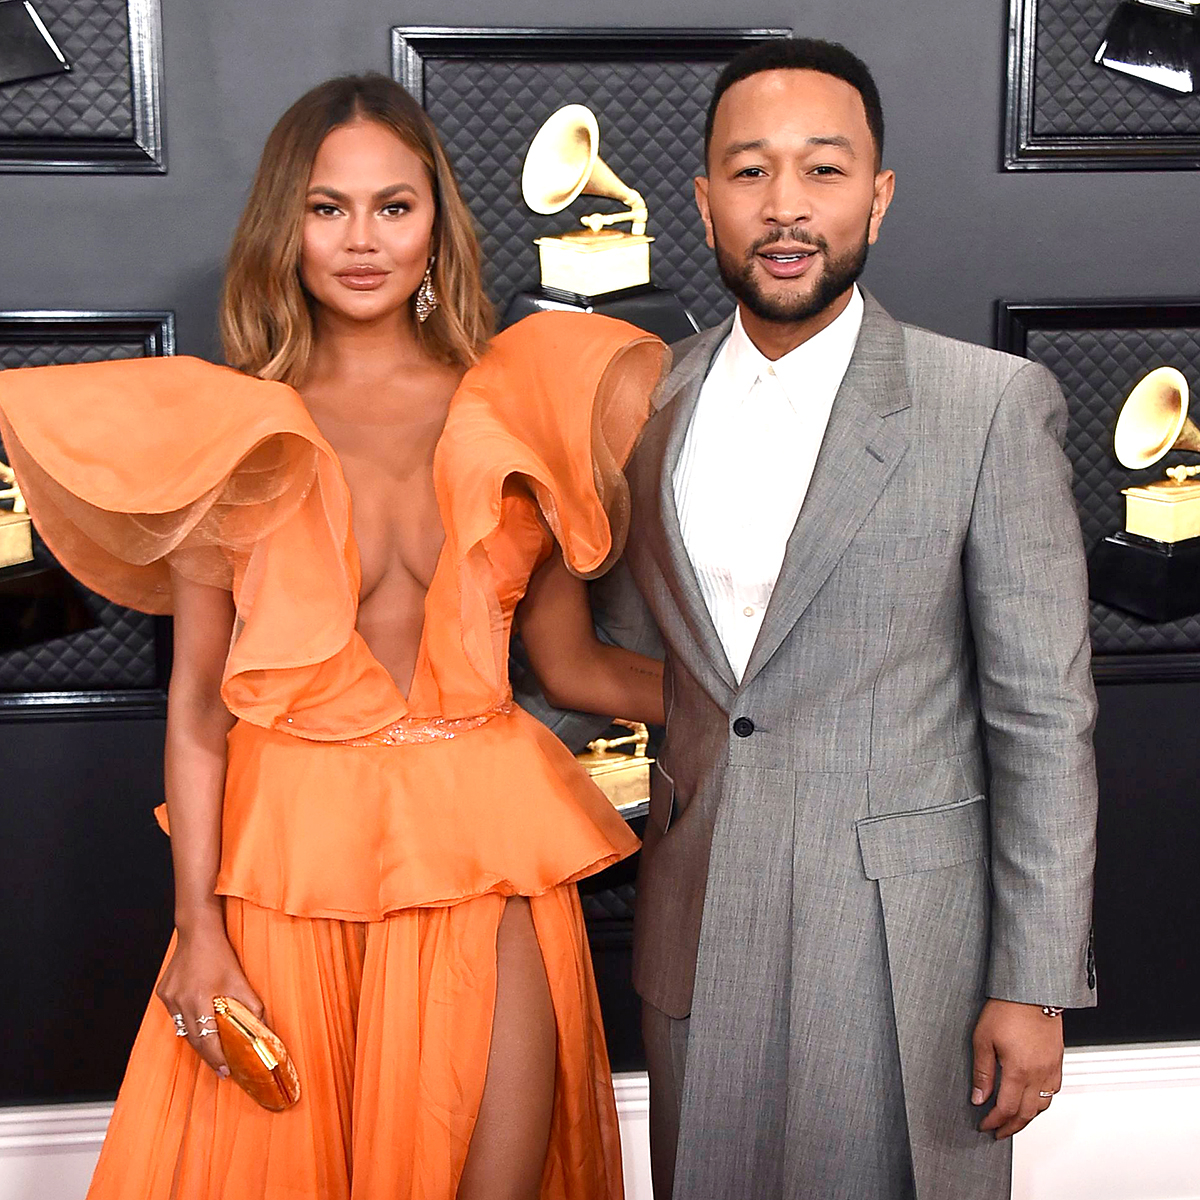 Stars Send Love and Support to Chrissy Teigen After Pregnancy Loss